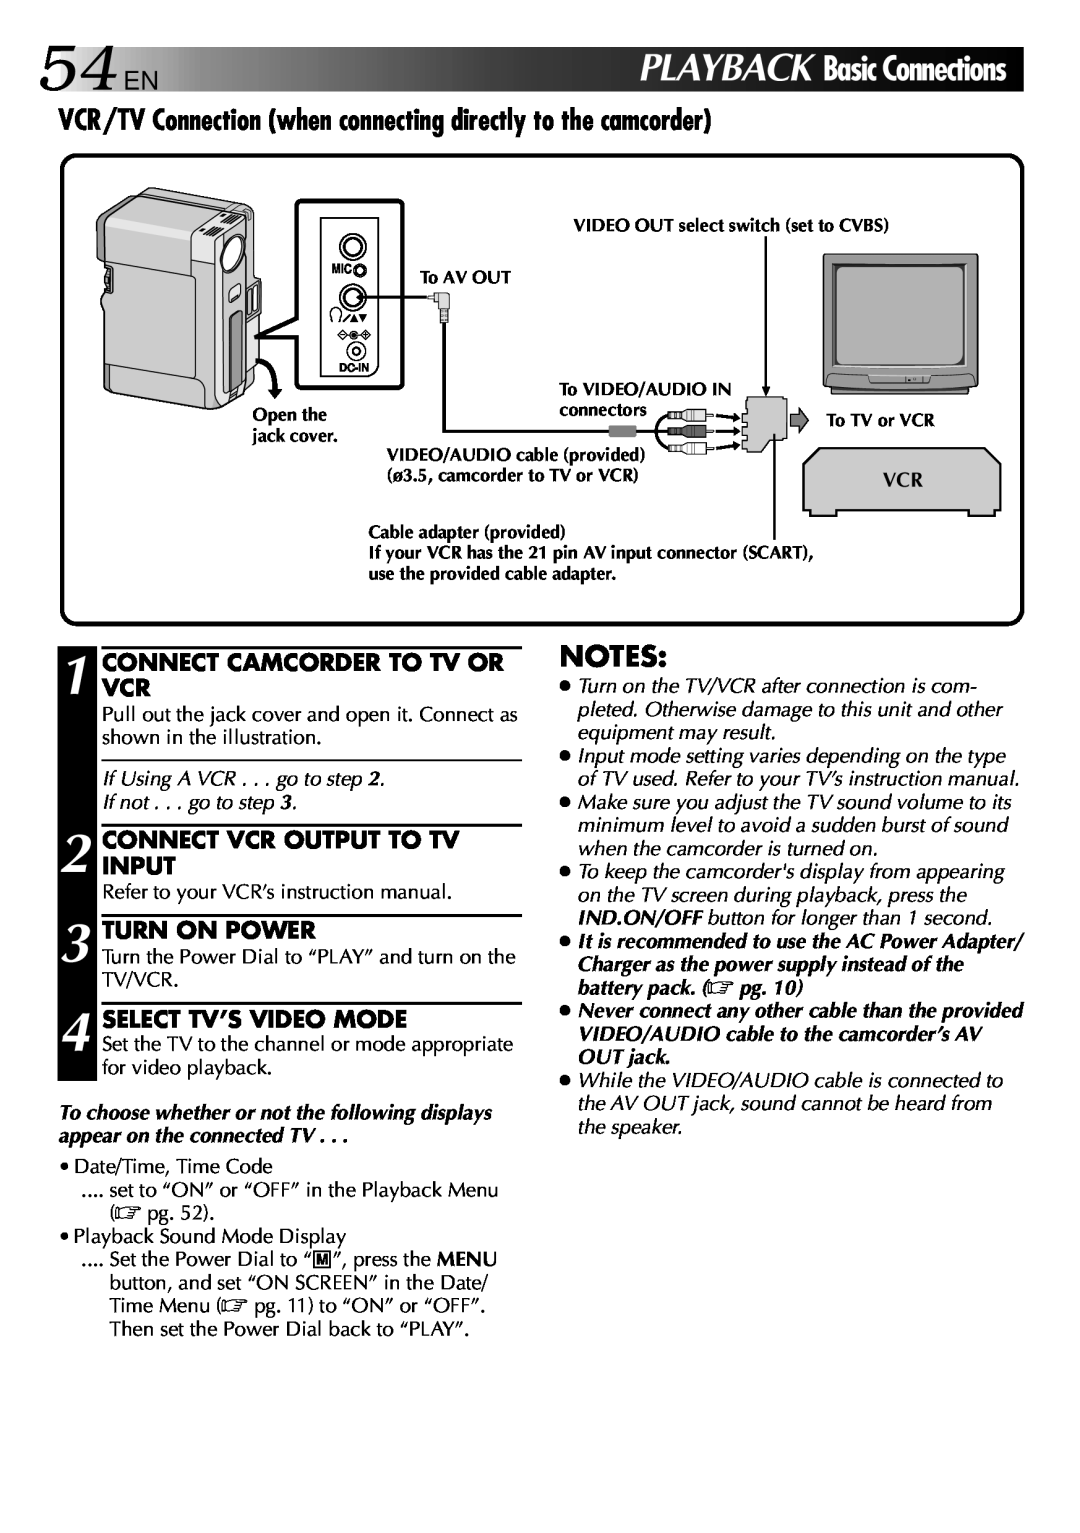 JVC LYT0002-0V4A 54EN PLAYBACK Basic Connections, VCR/TV Connection when connecting directly to the camcorder 